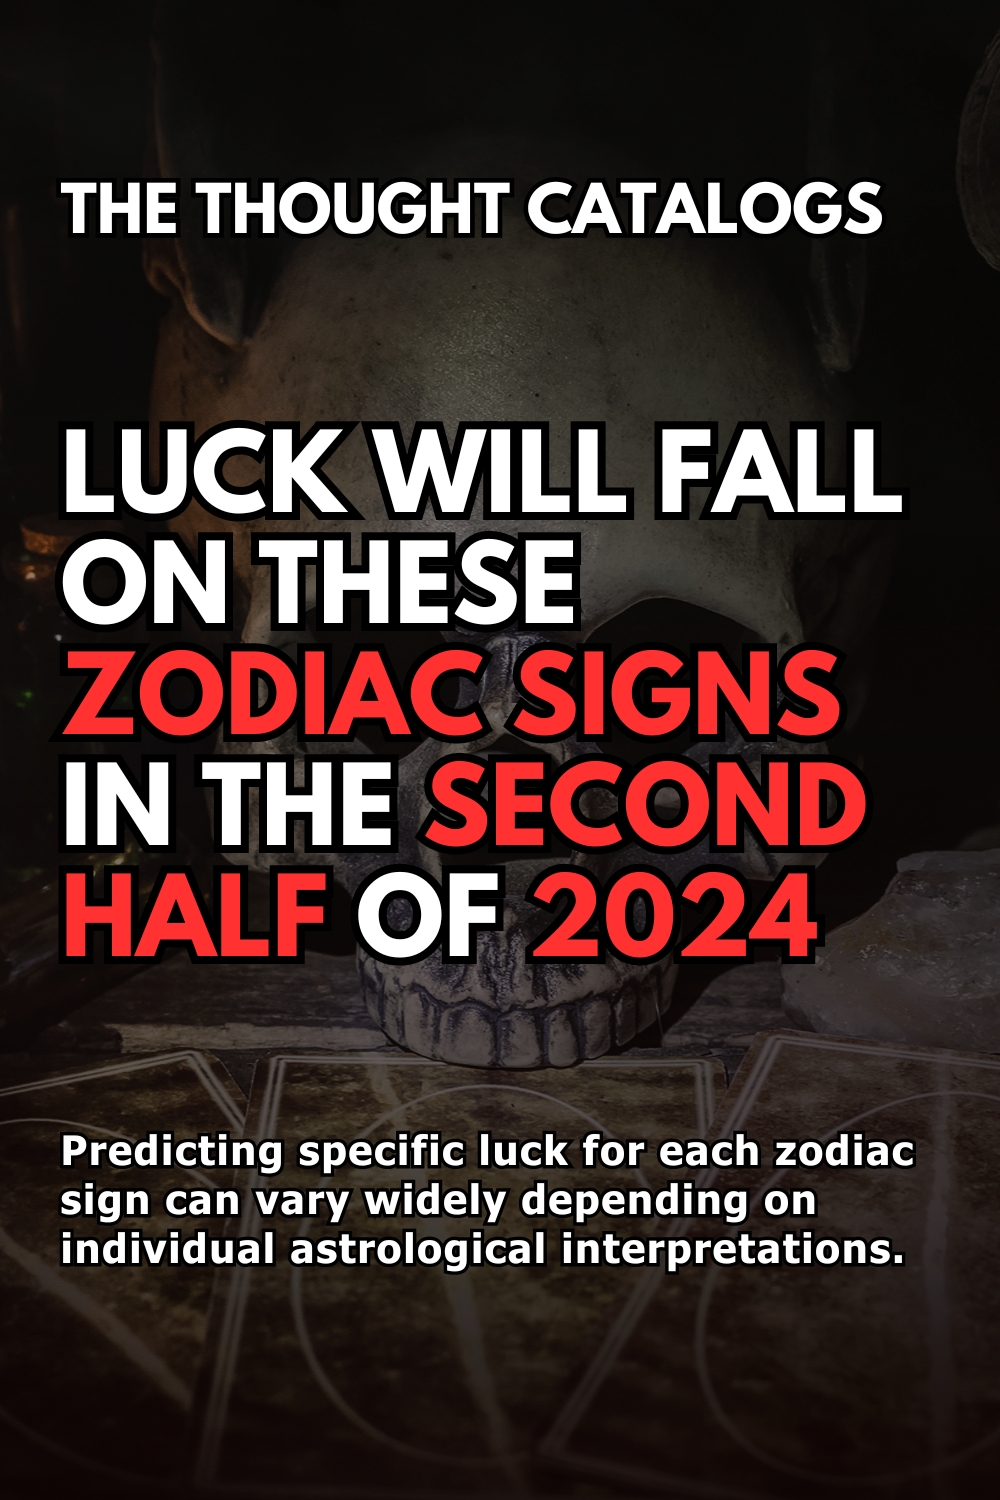 Luck Will Fall On These Zodiac Signs In The Second Half Of 2024: The Last Chance For You!